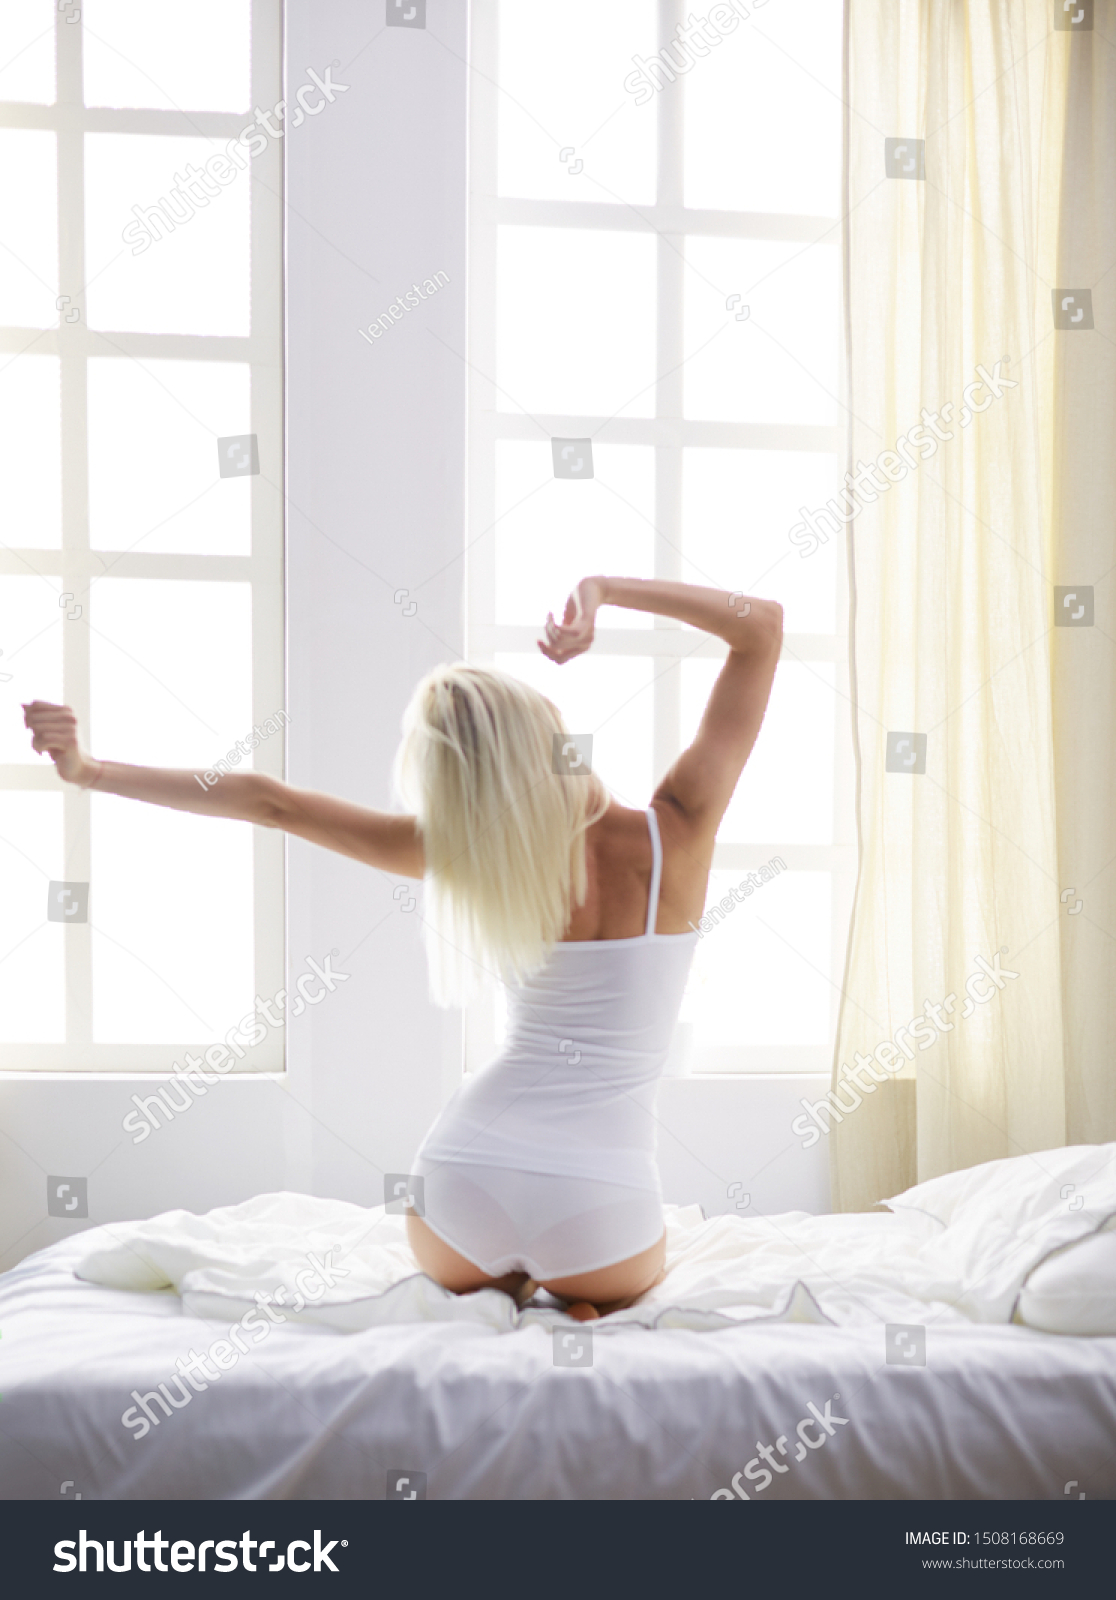 Woman stretching in bed after wake up, back view #1508168669